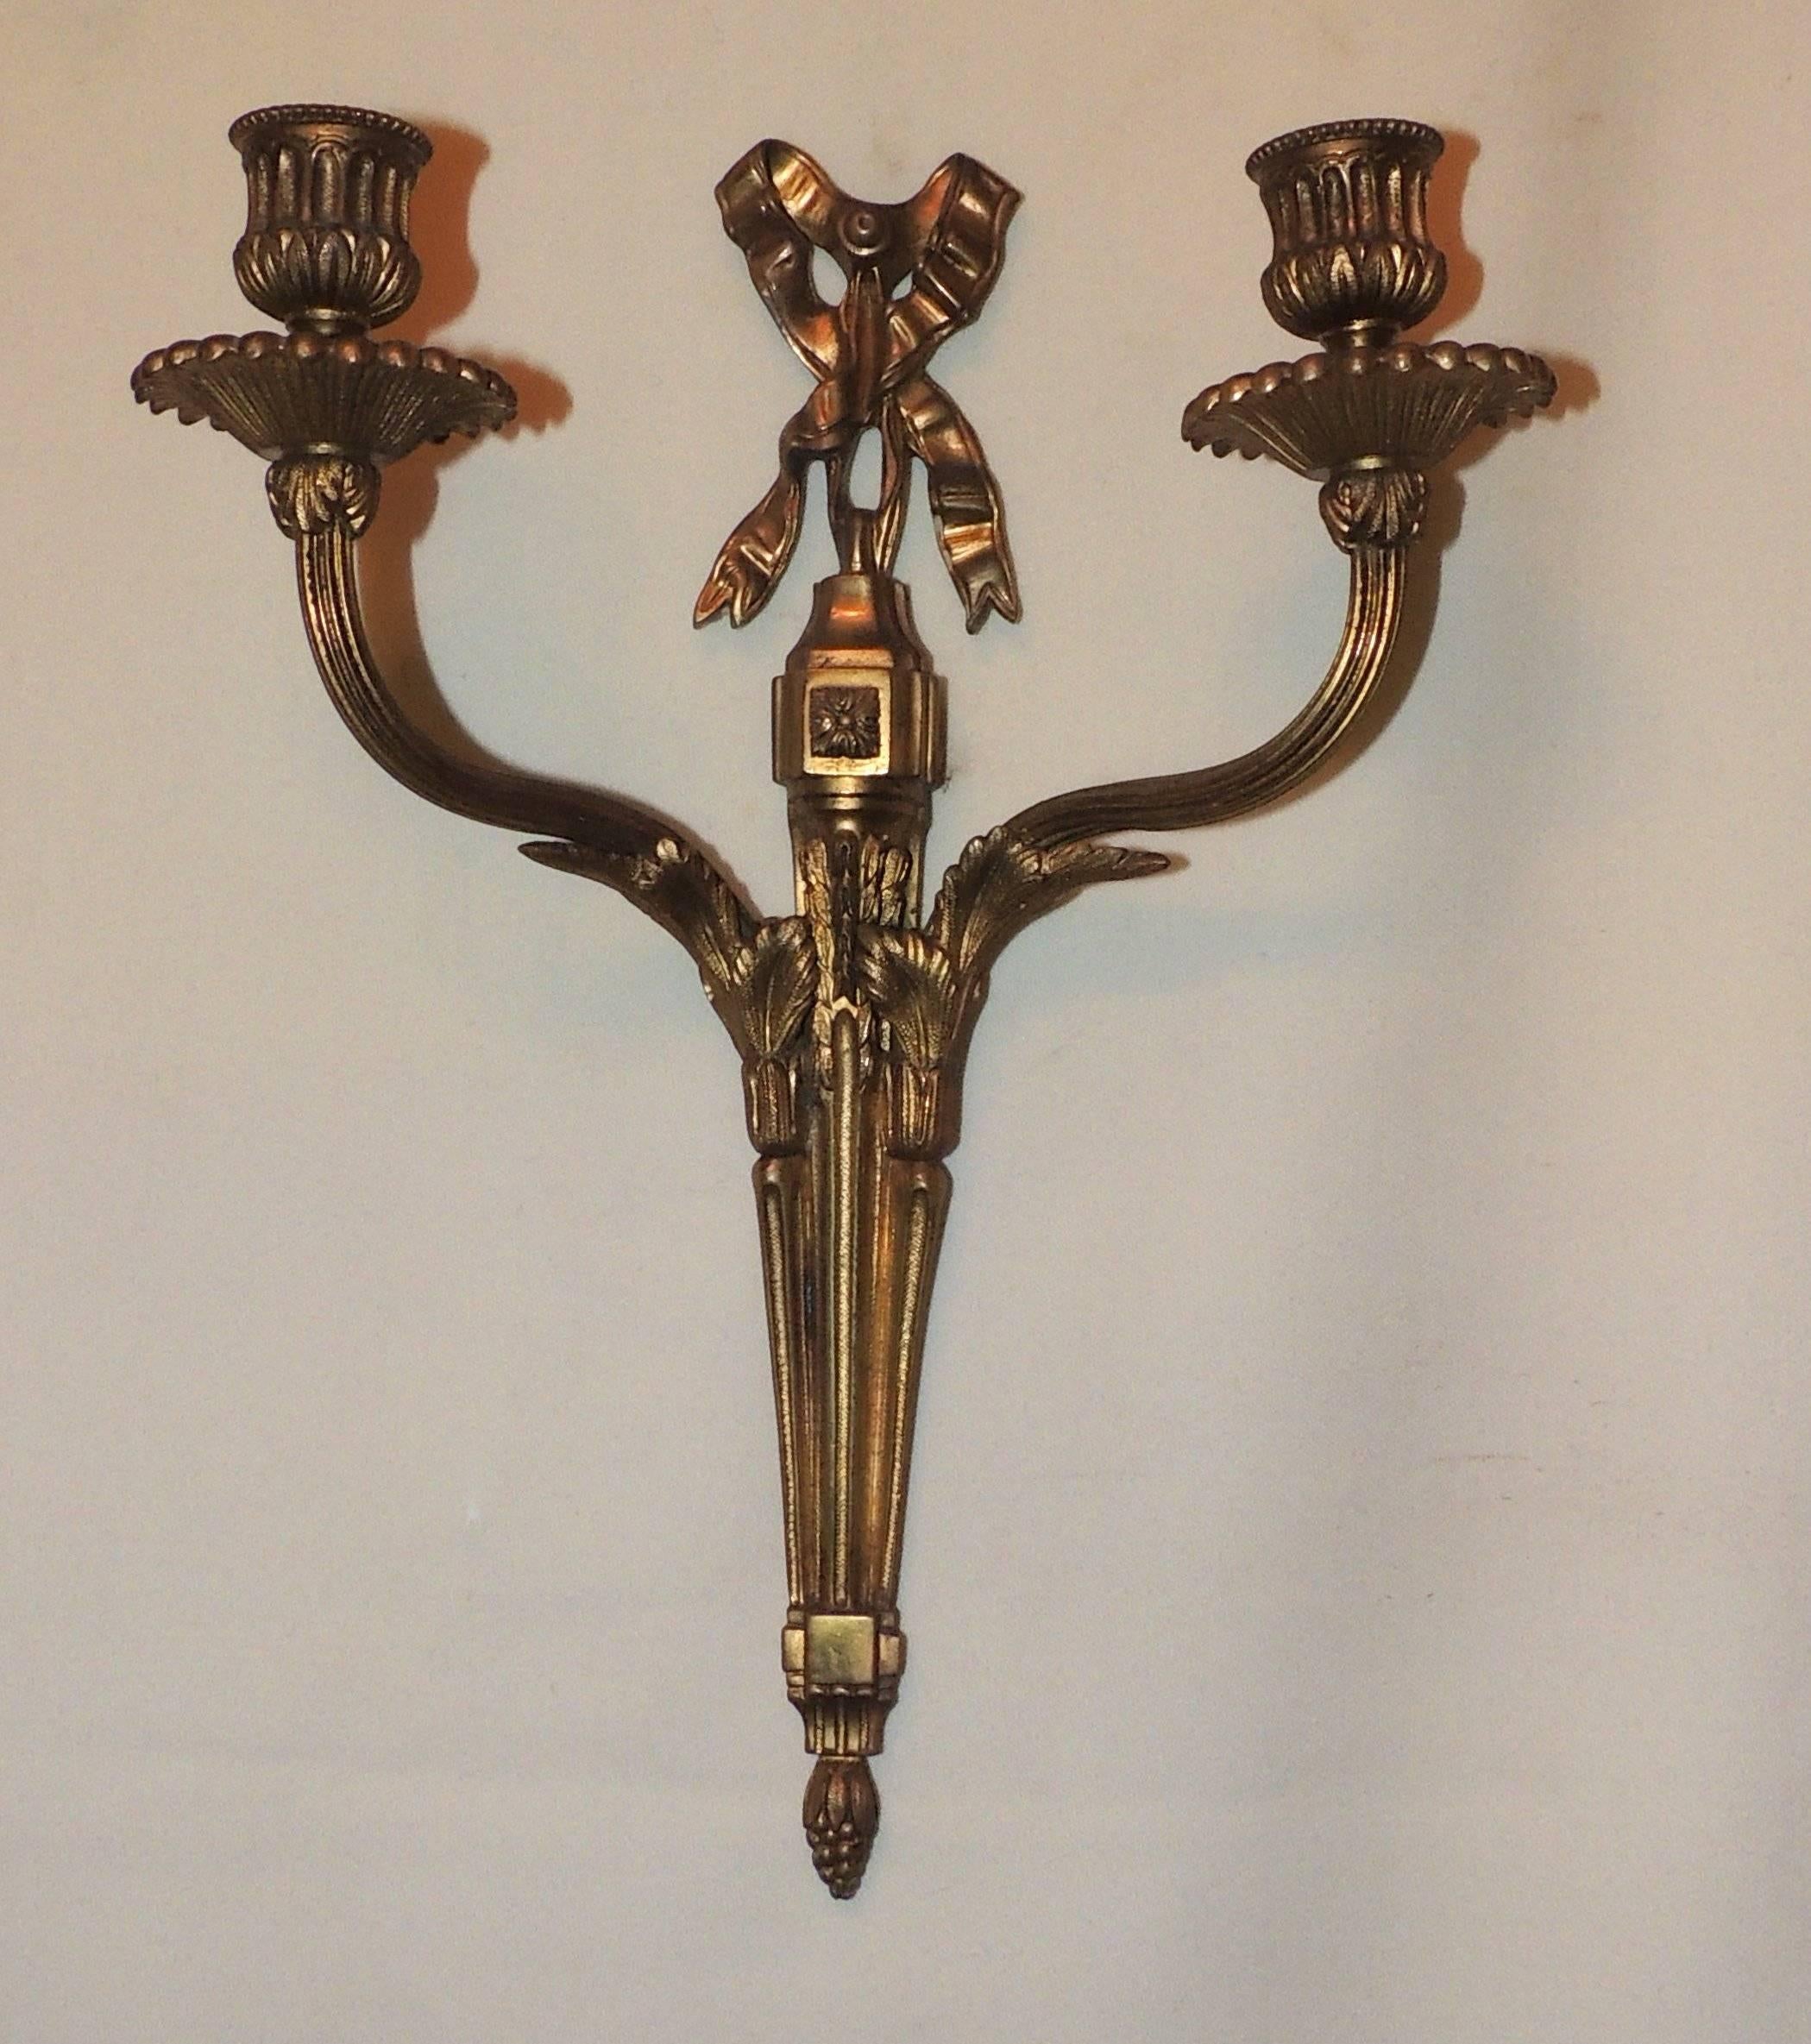 Wonderful set of four bow top neoclassical two-arm sconces

Very Fine work on bronze with bow tops and filigree details

Can be electrified.

Sold by the pair.